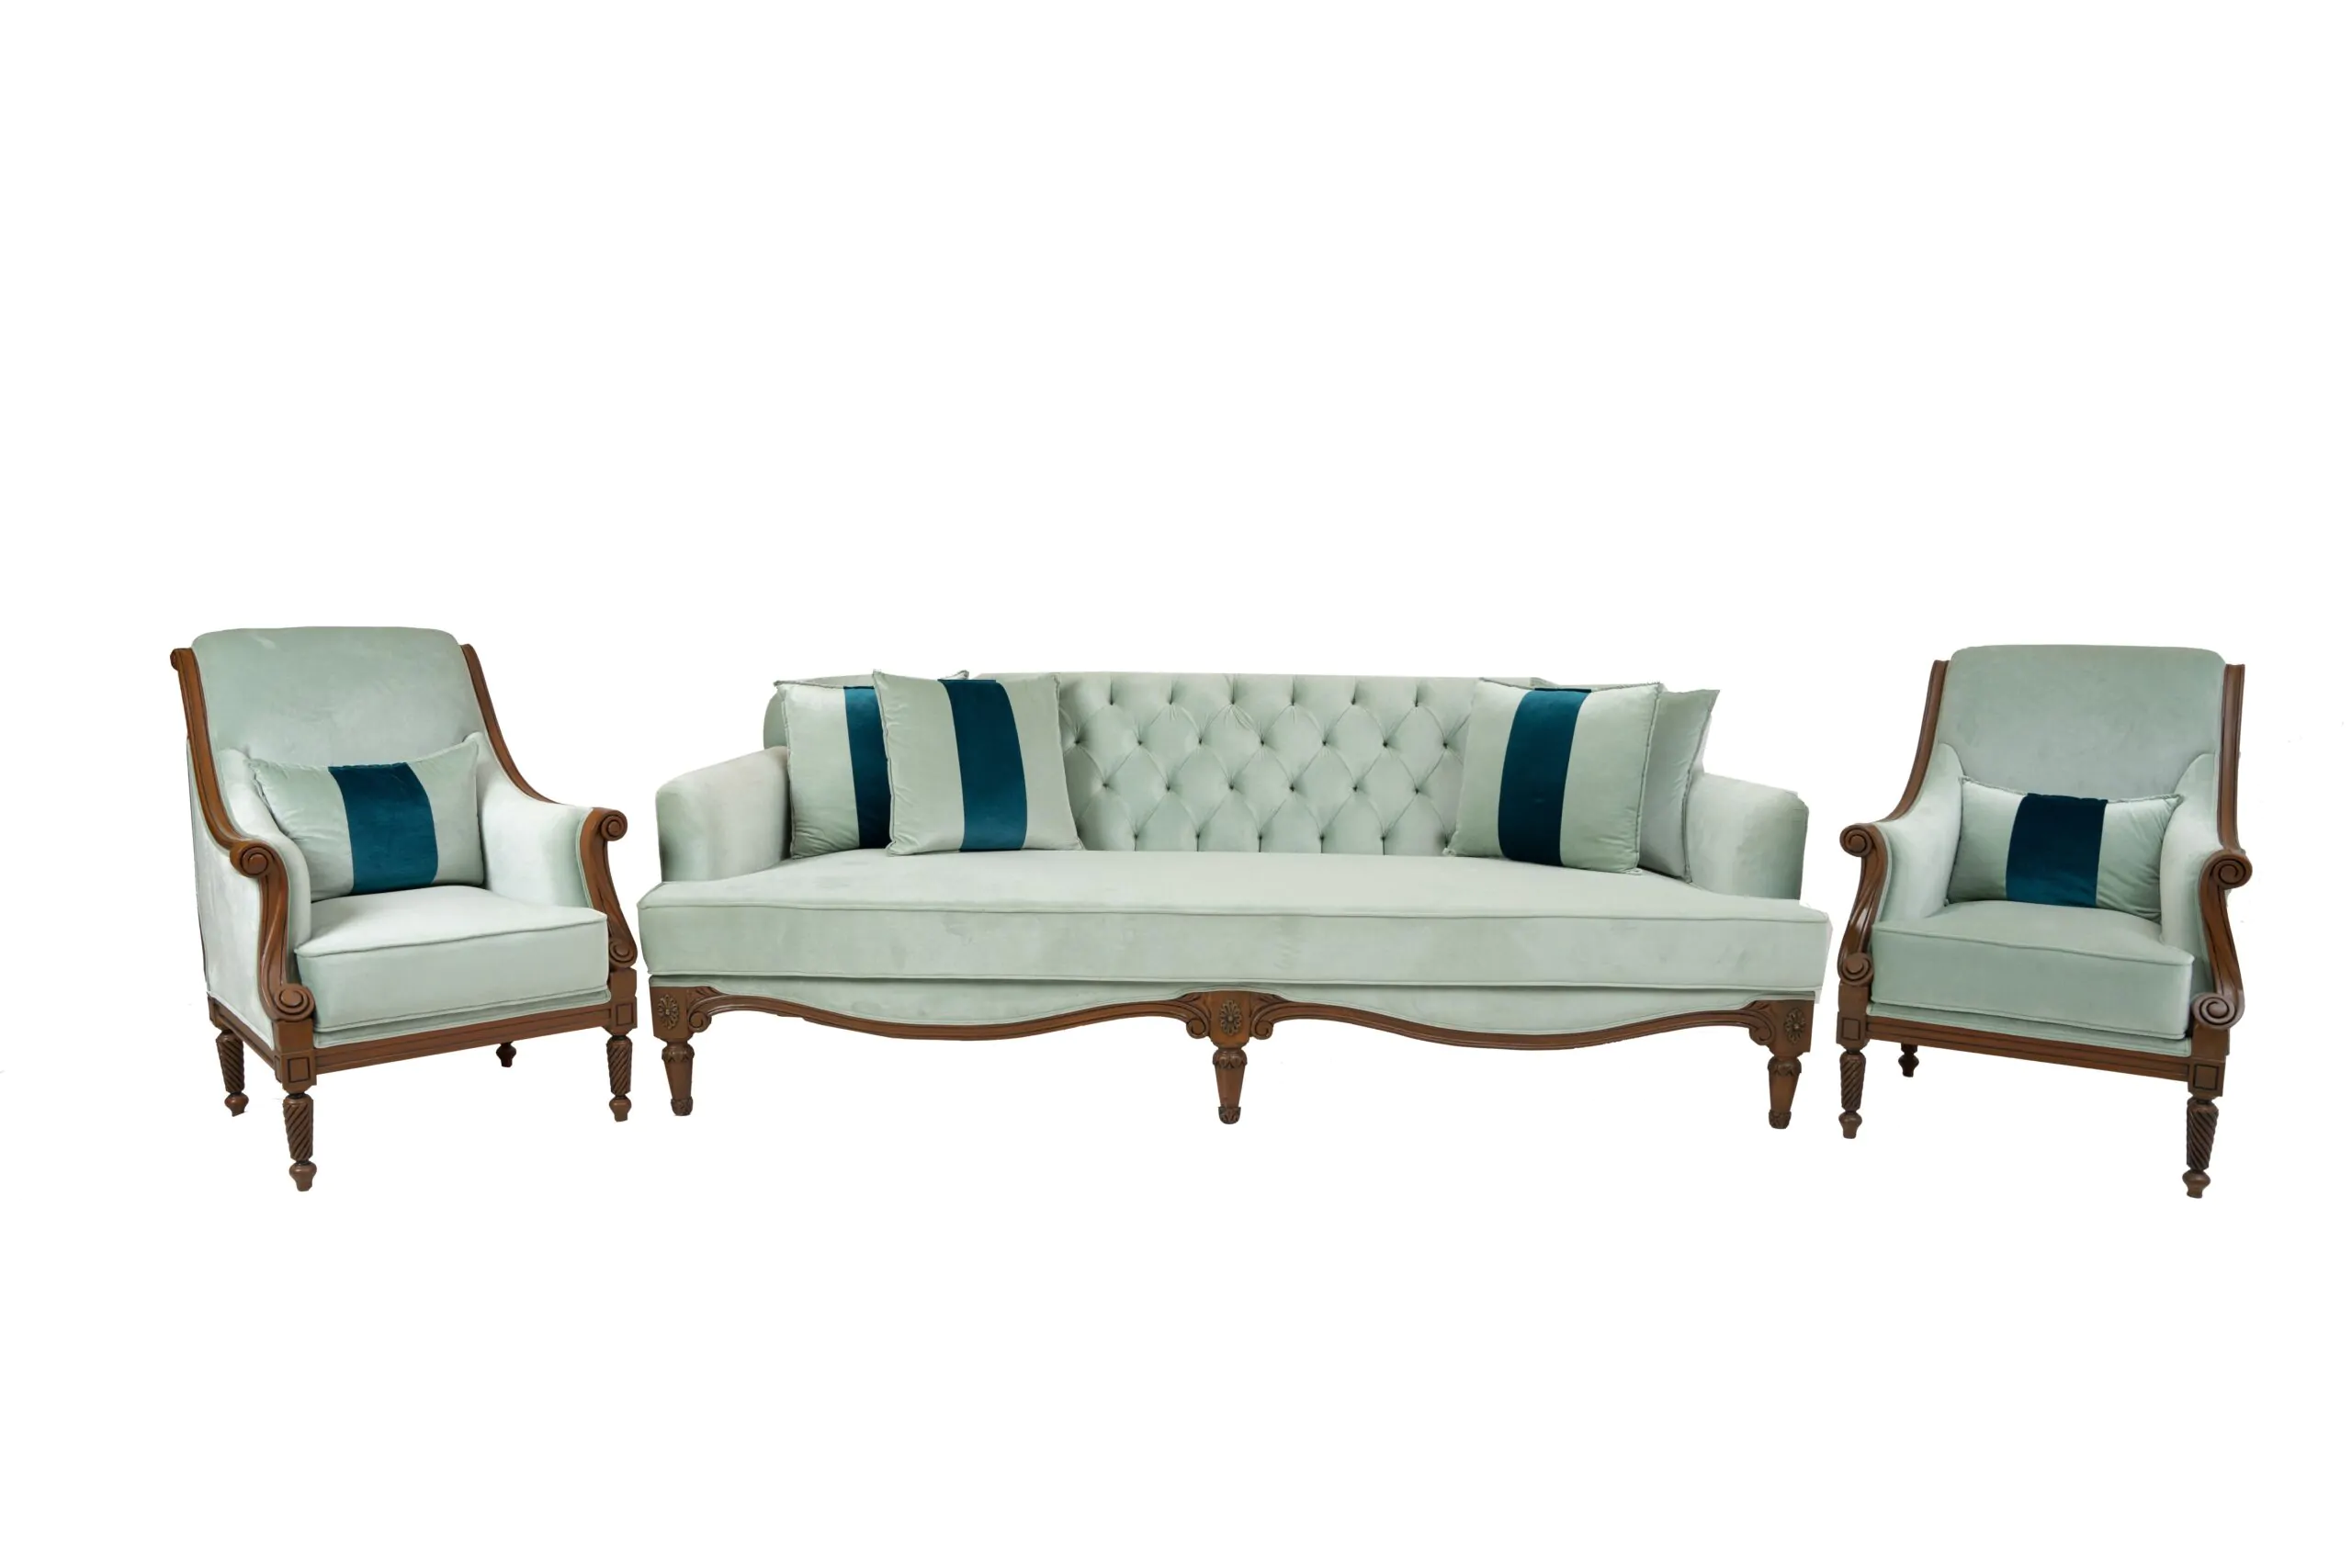 Alyxandra Sofa Set – Elegant and Comfortable Furniture for Your Living Room